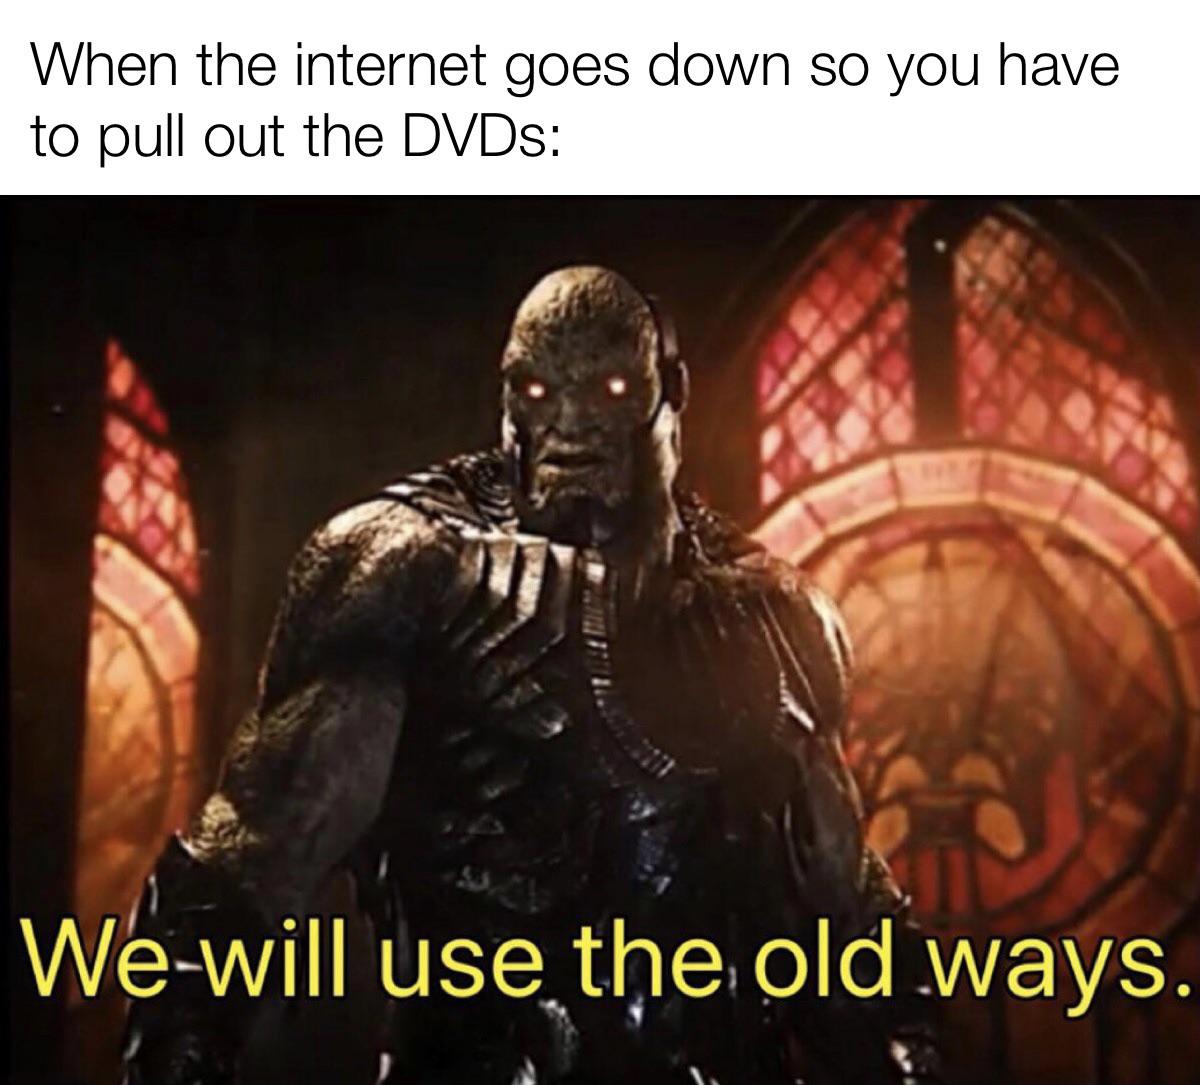 funny gaming memes - we will use the old ways darkseid - When the internet goes down so you have to pull out the DVDs We will use the old ways.